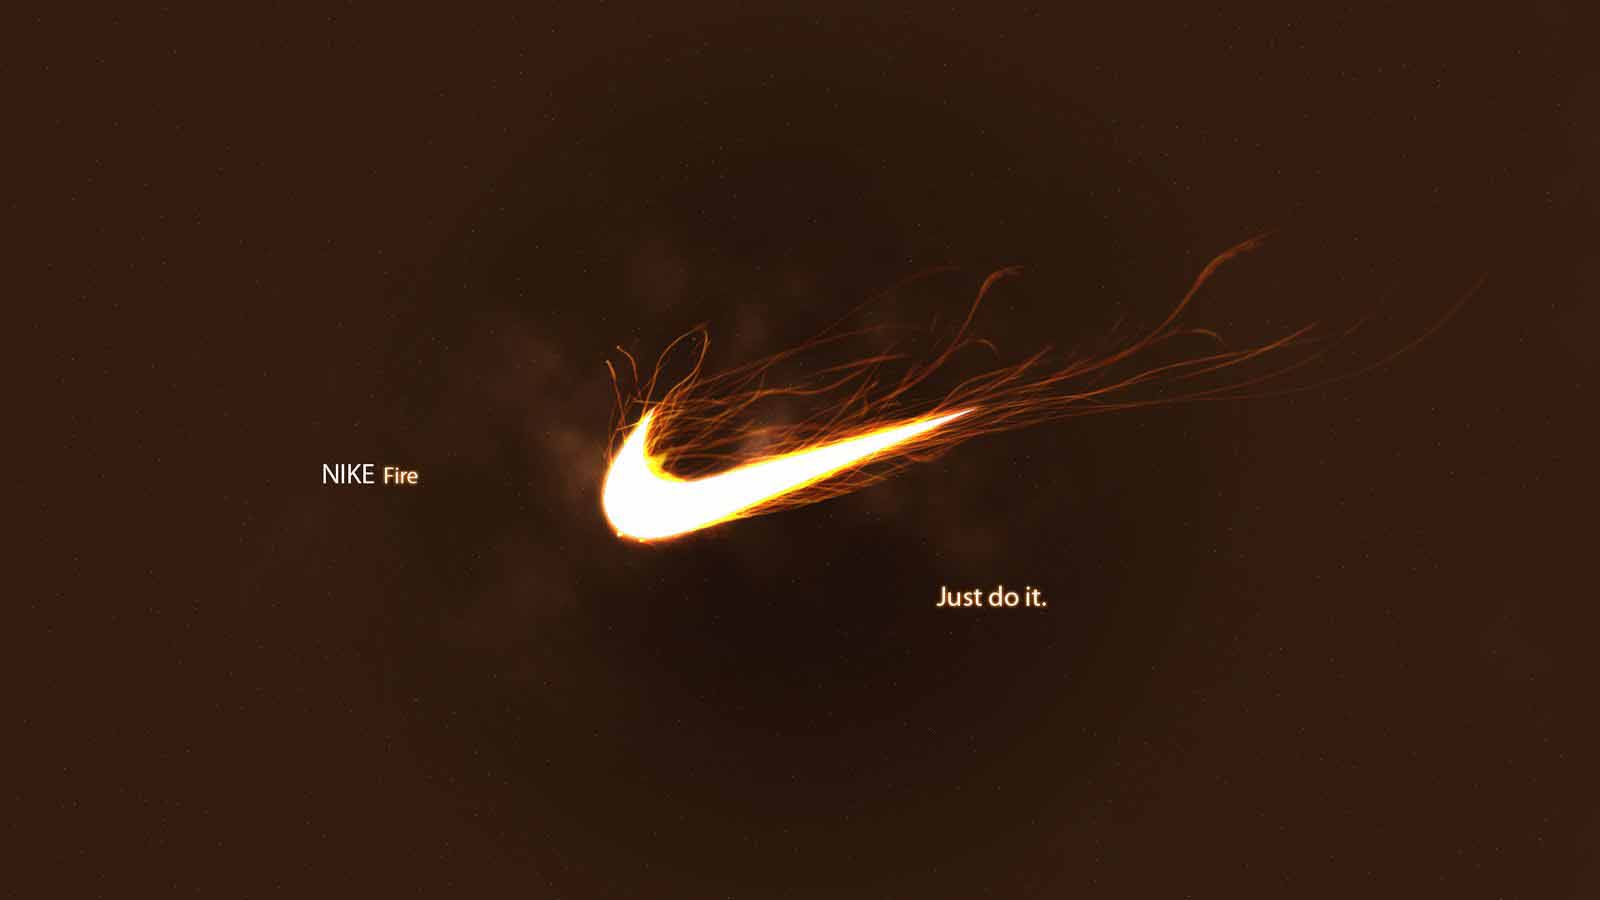 Nike Just Do it Image We select the best collection of hd wallpapers